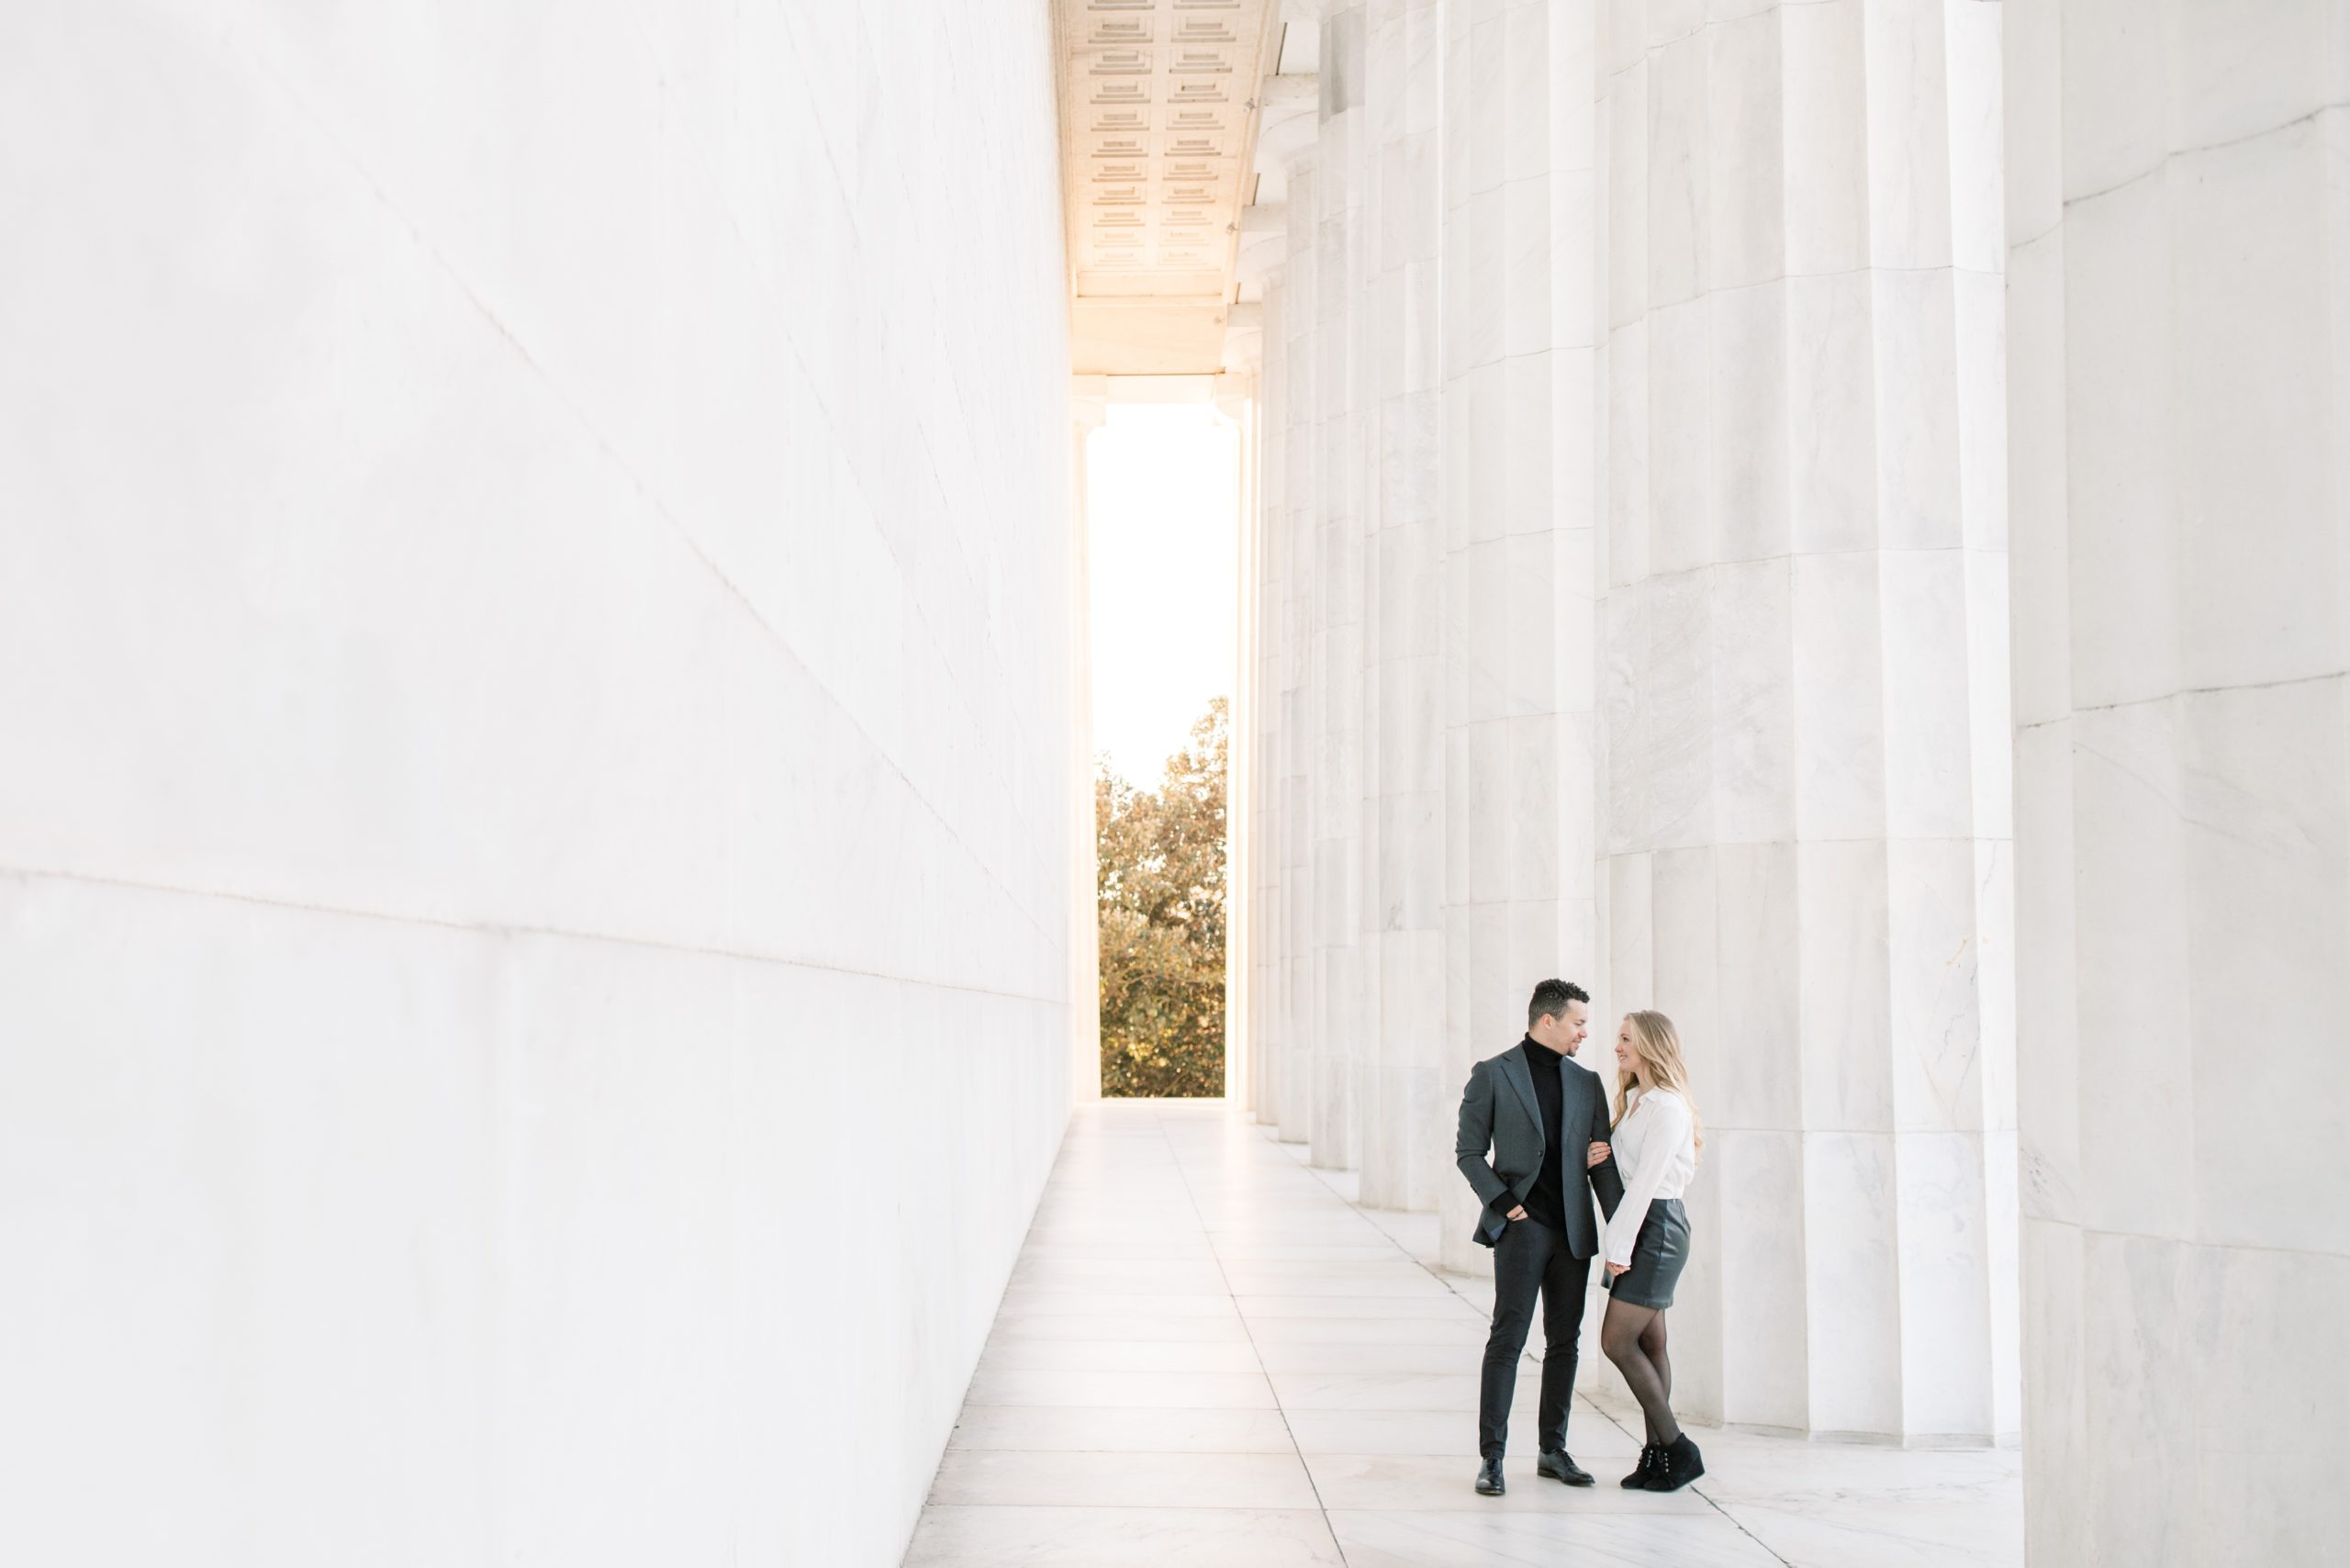 A winter engagement session in Washington, DC at the National Mall featuring iconic sites such as the Lincoln Memorial and Reflecting Pool.